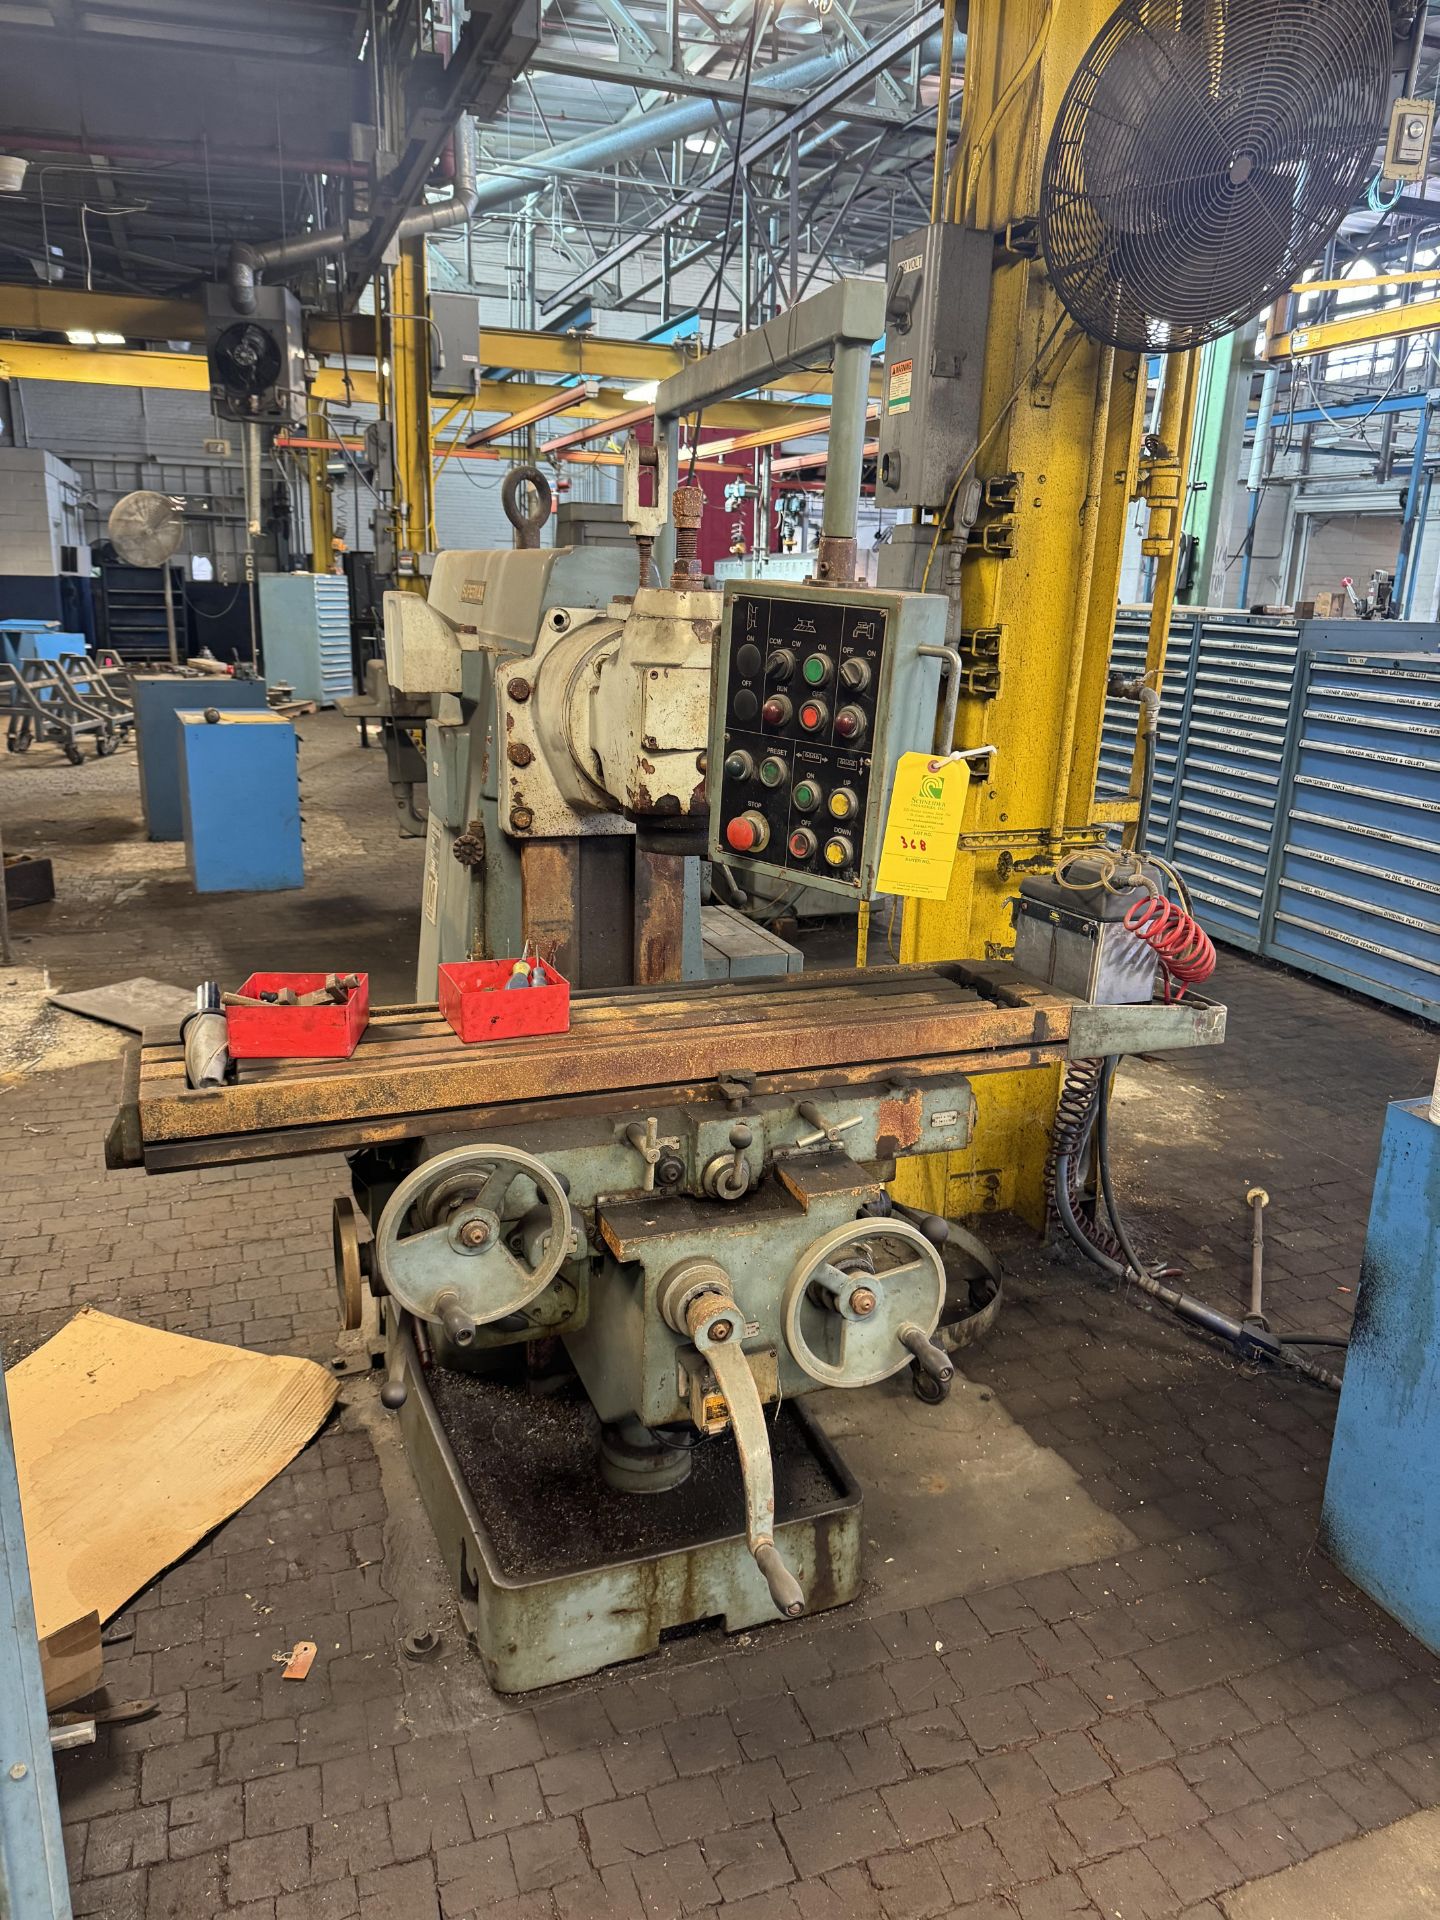 Supermax Milling Machine, Rigging/ Removal Fee - $450